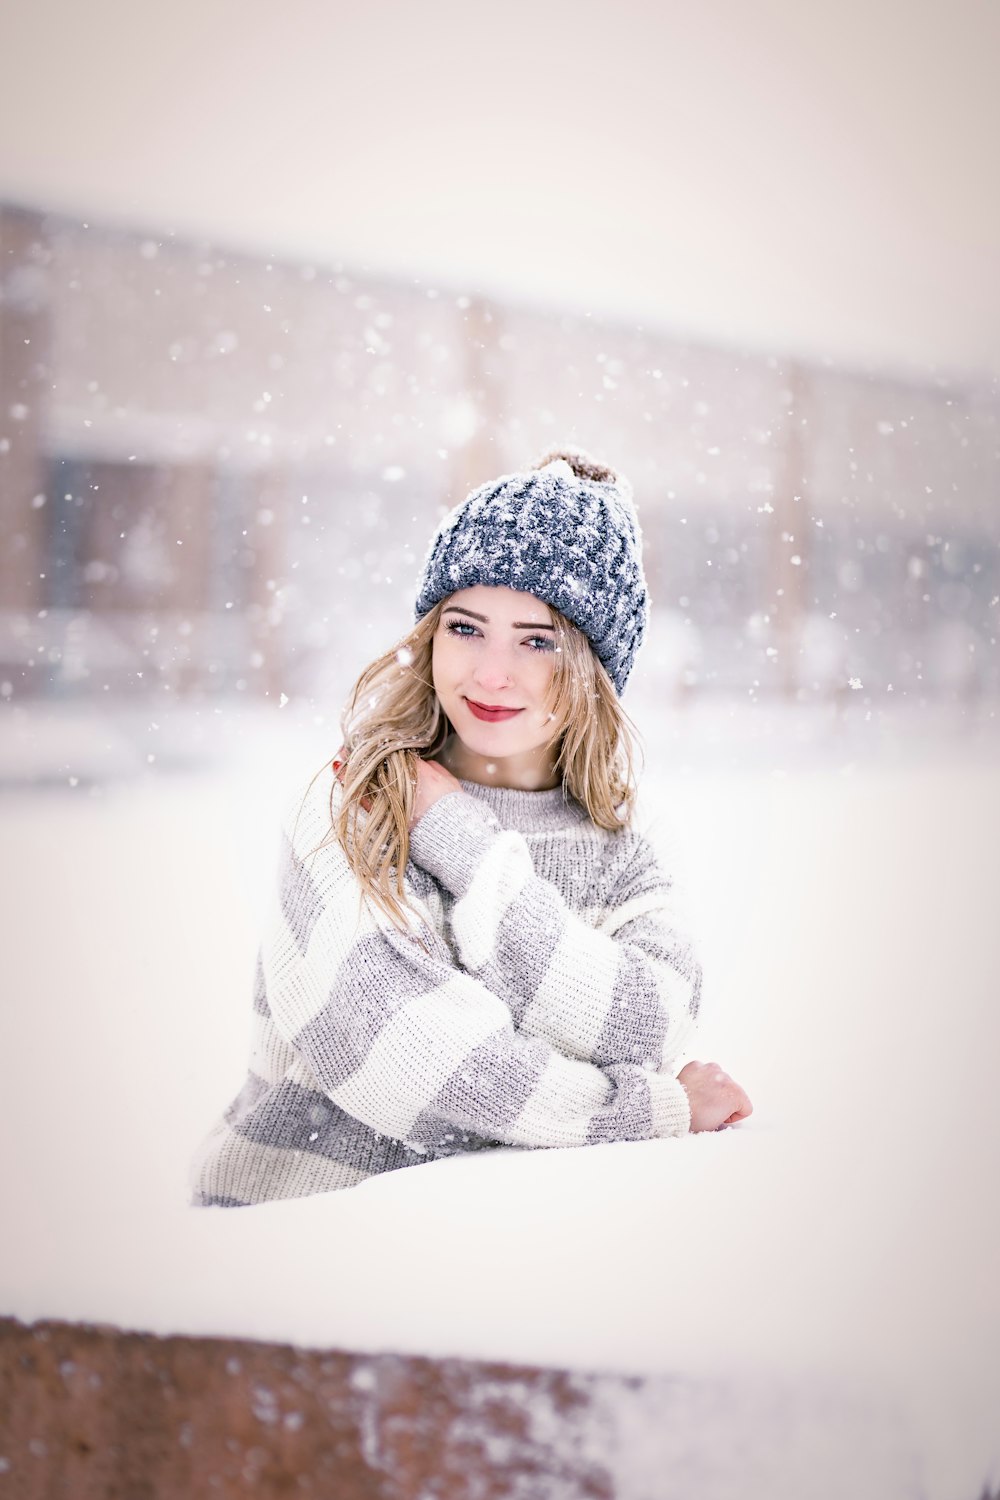 a woman wearing a hat and sweater standing in the snow